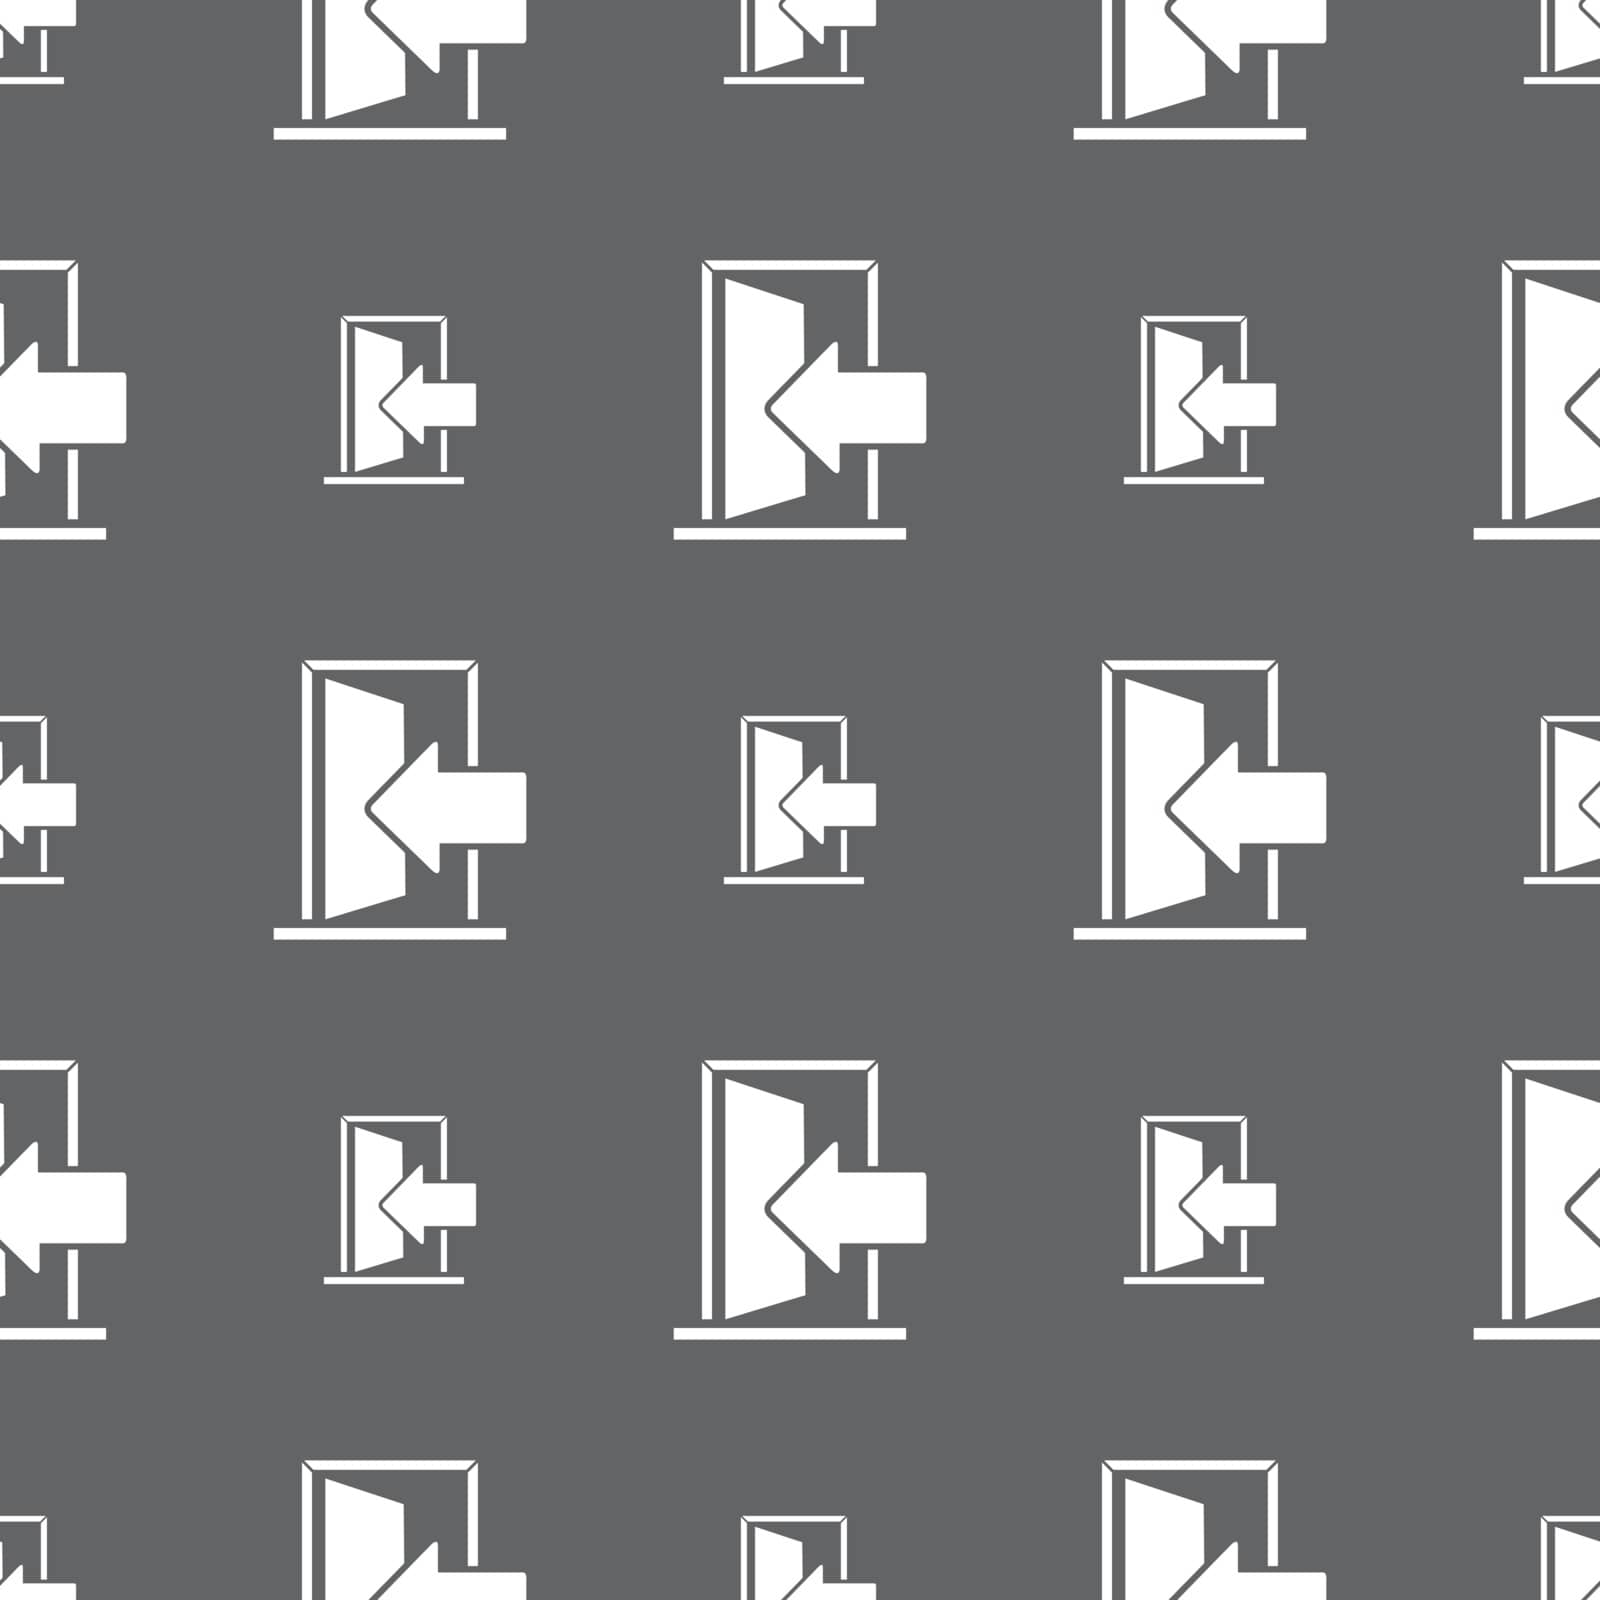 Door, Enter or exit icon sign. Seamless pattern on a gray background. Vector illustration